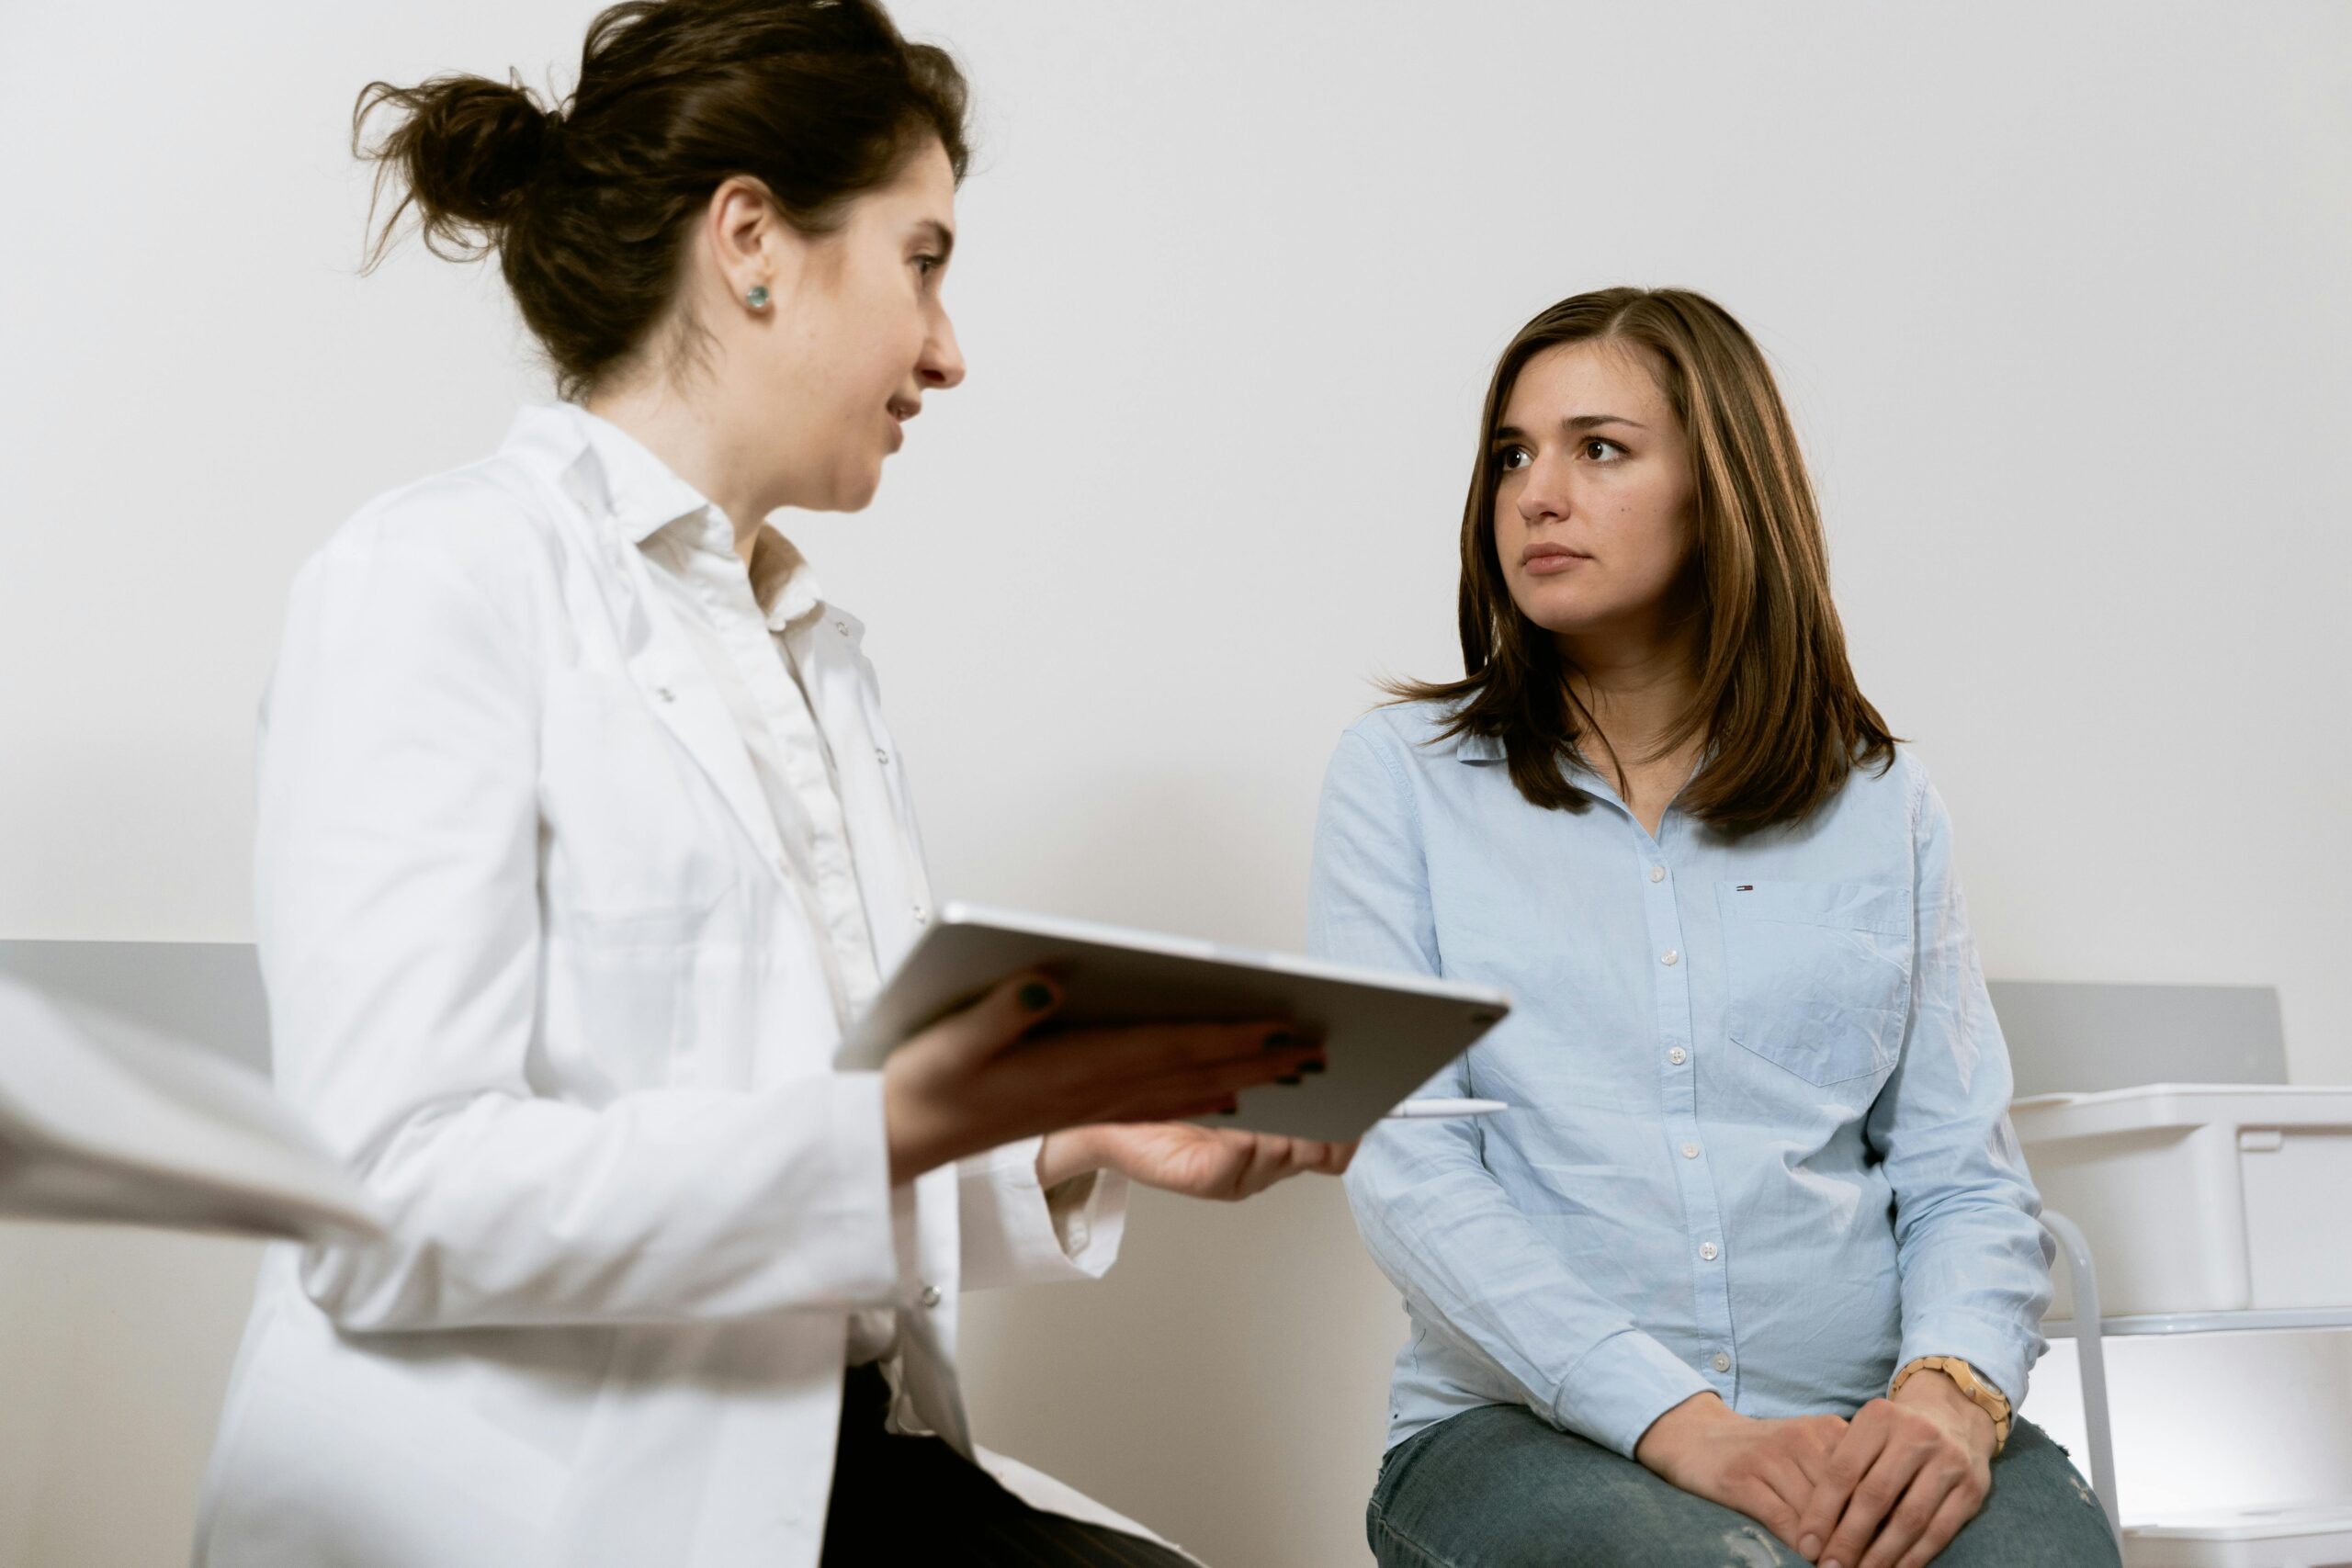 medical professional interviews a woman before a gynecology procedure